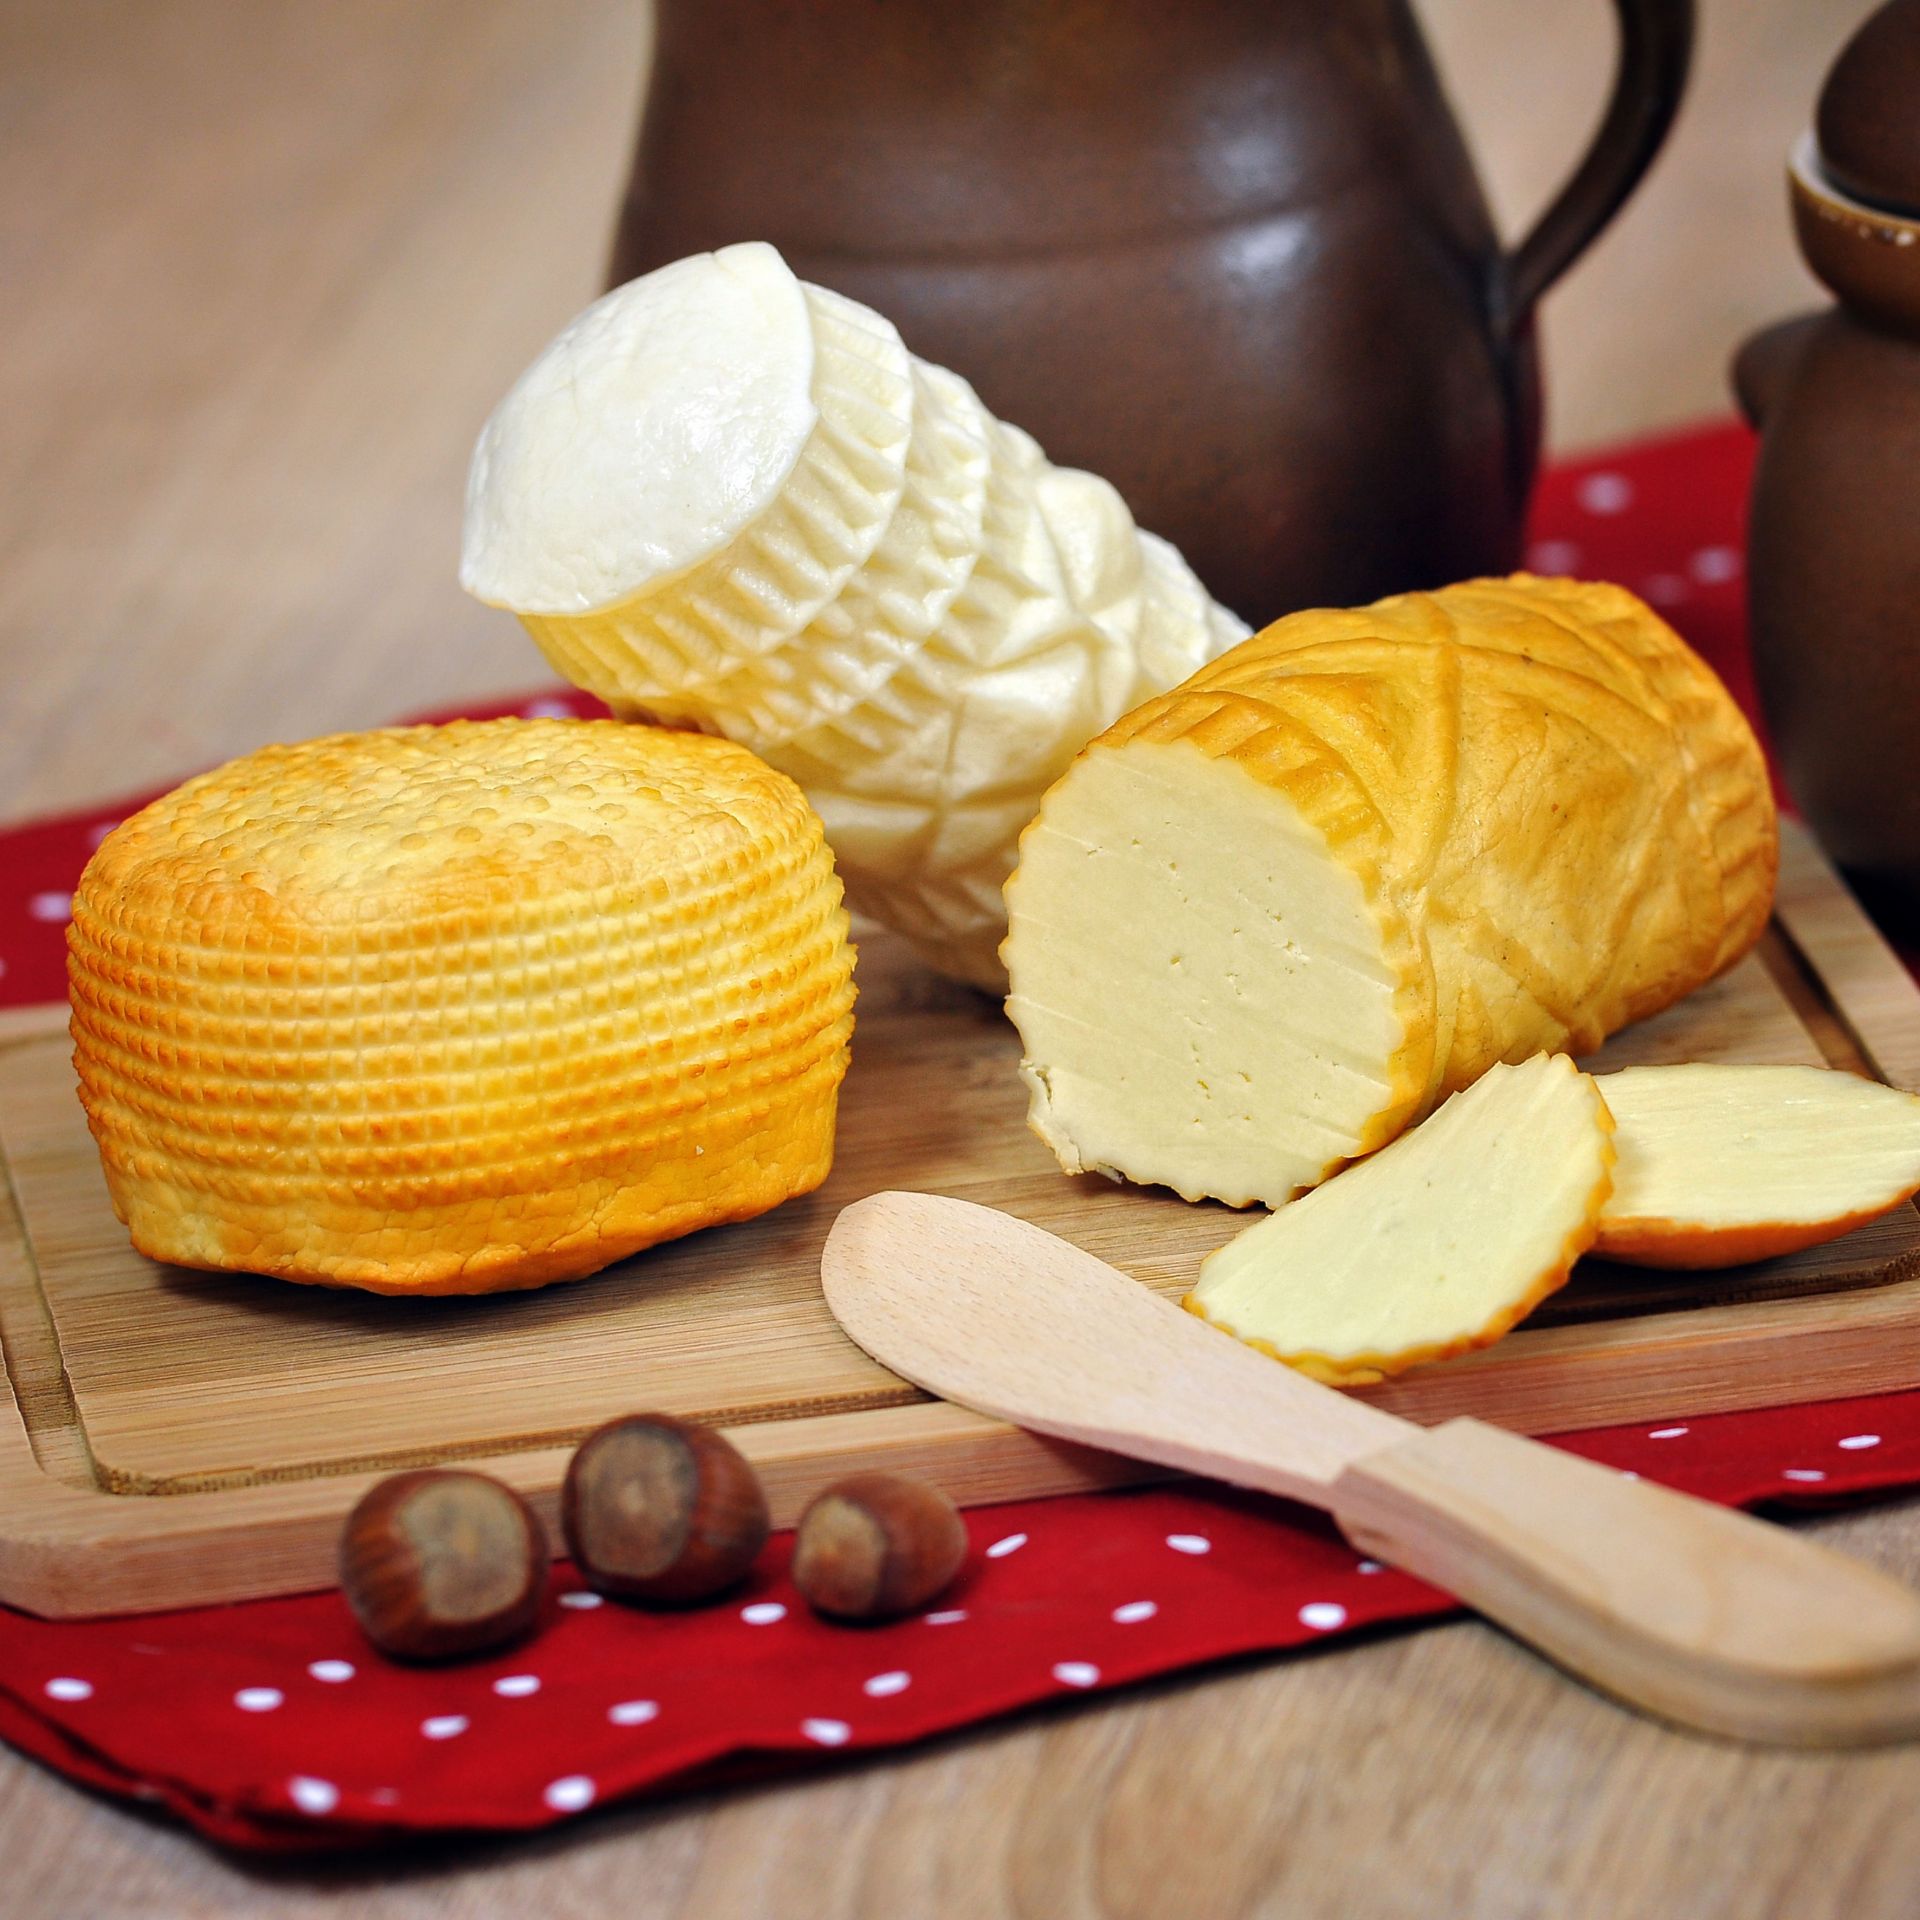 Poland’s National Fund cheese